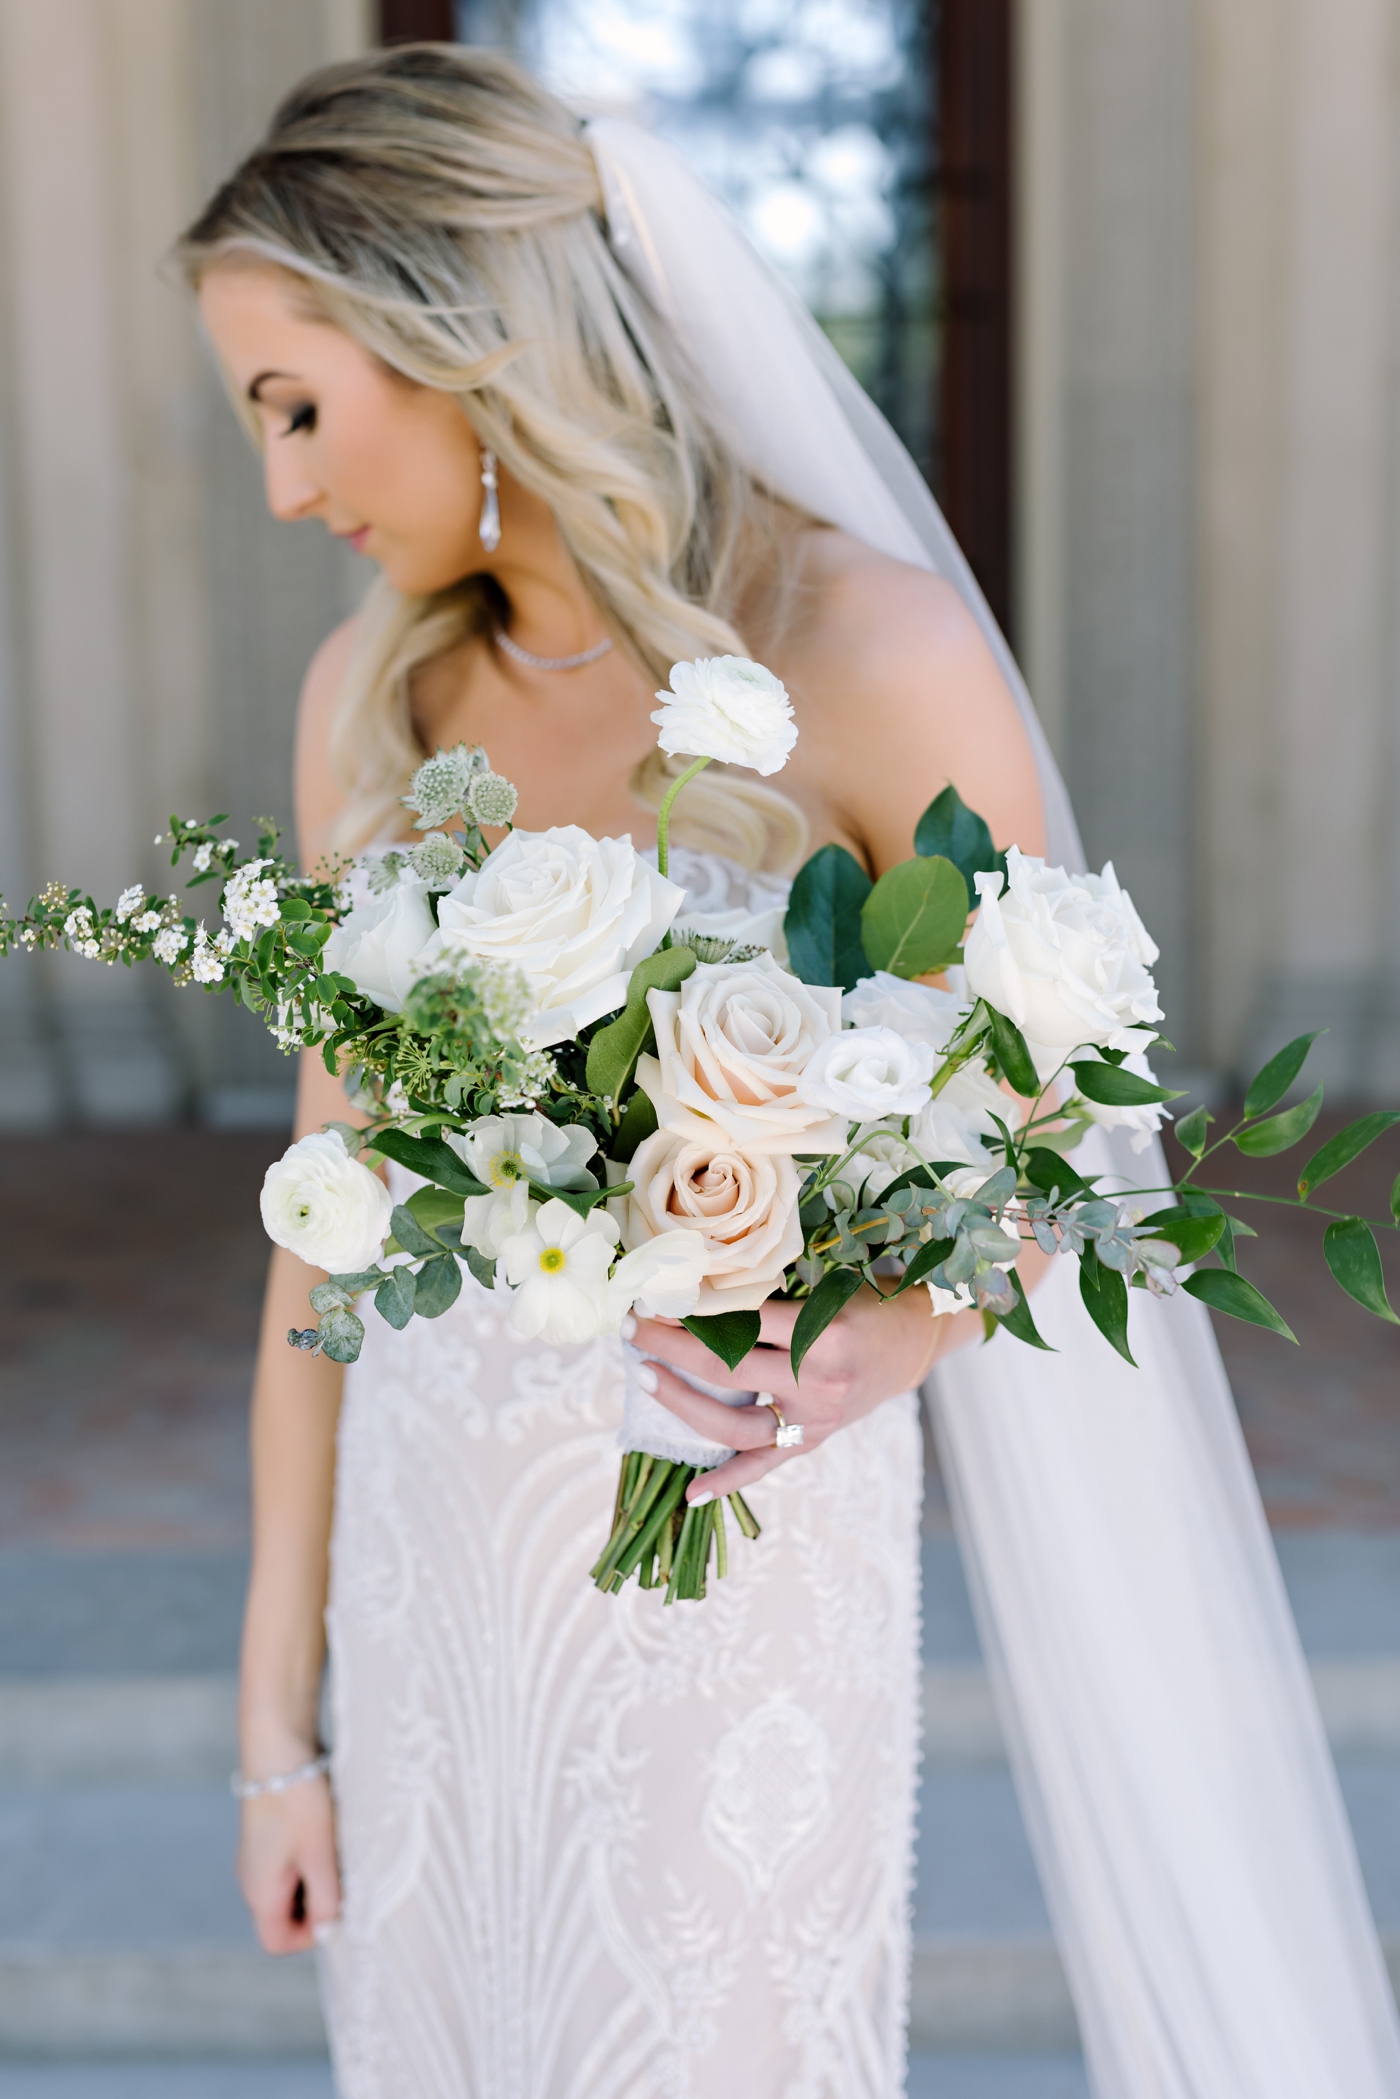 Bride in a lace gown by Adam Zohar, bouquet by Gypsy Floral